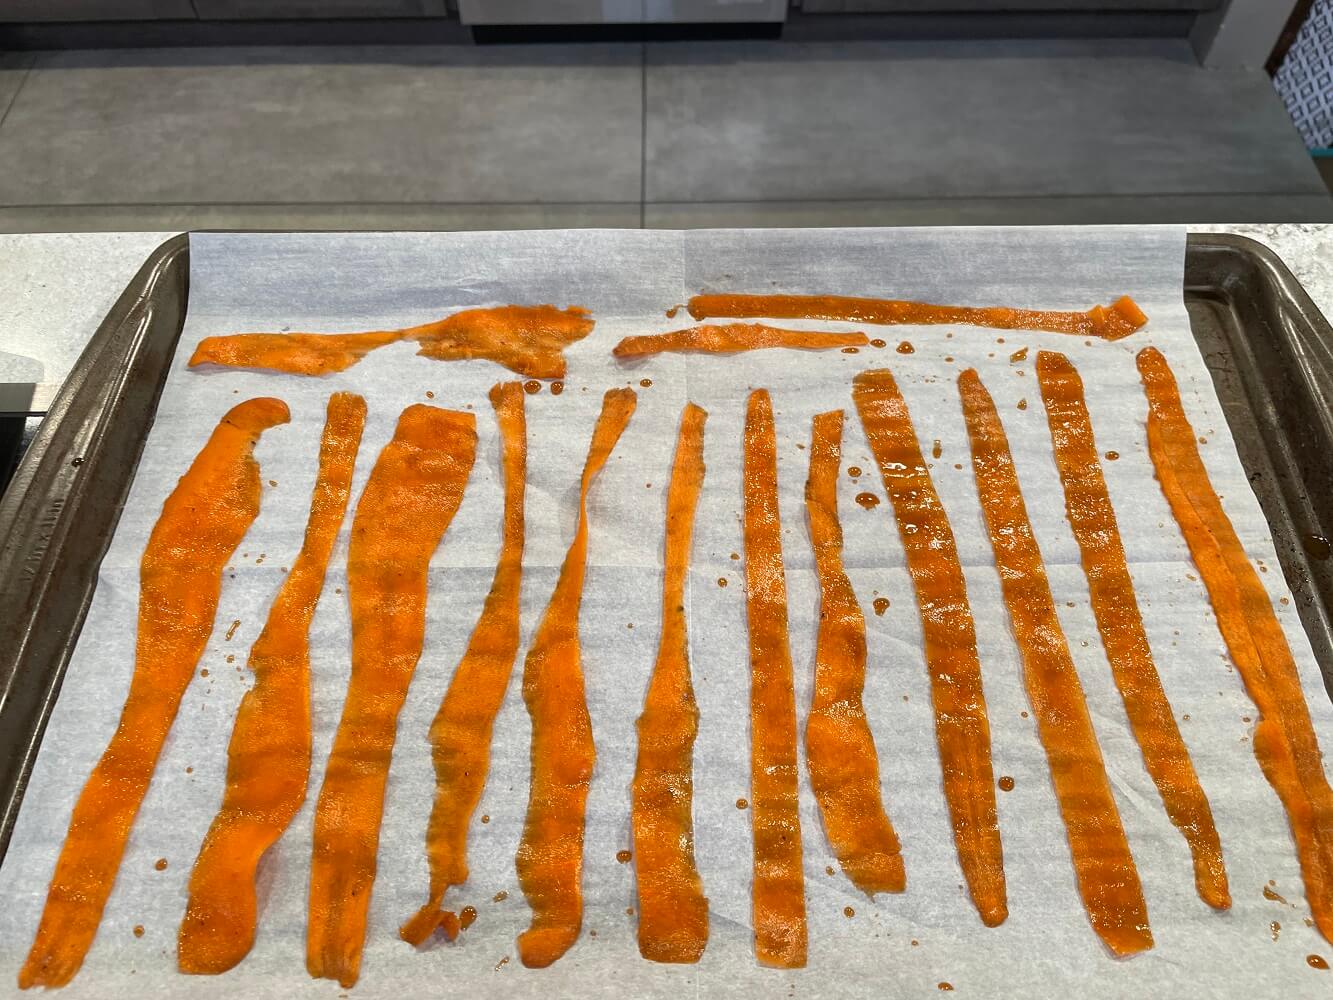 Carrot Bacon, one of summer's most popular recipes